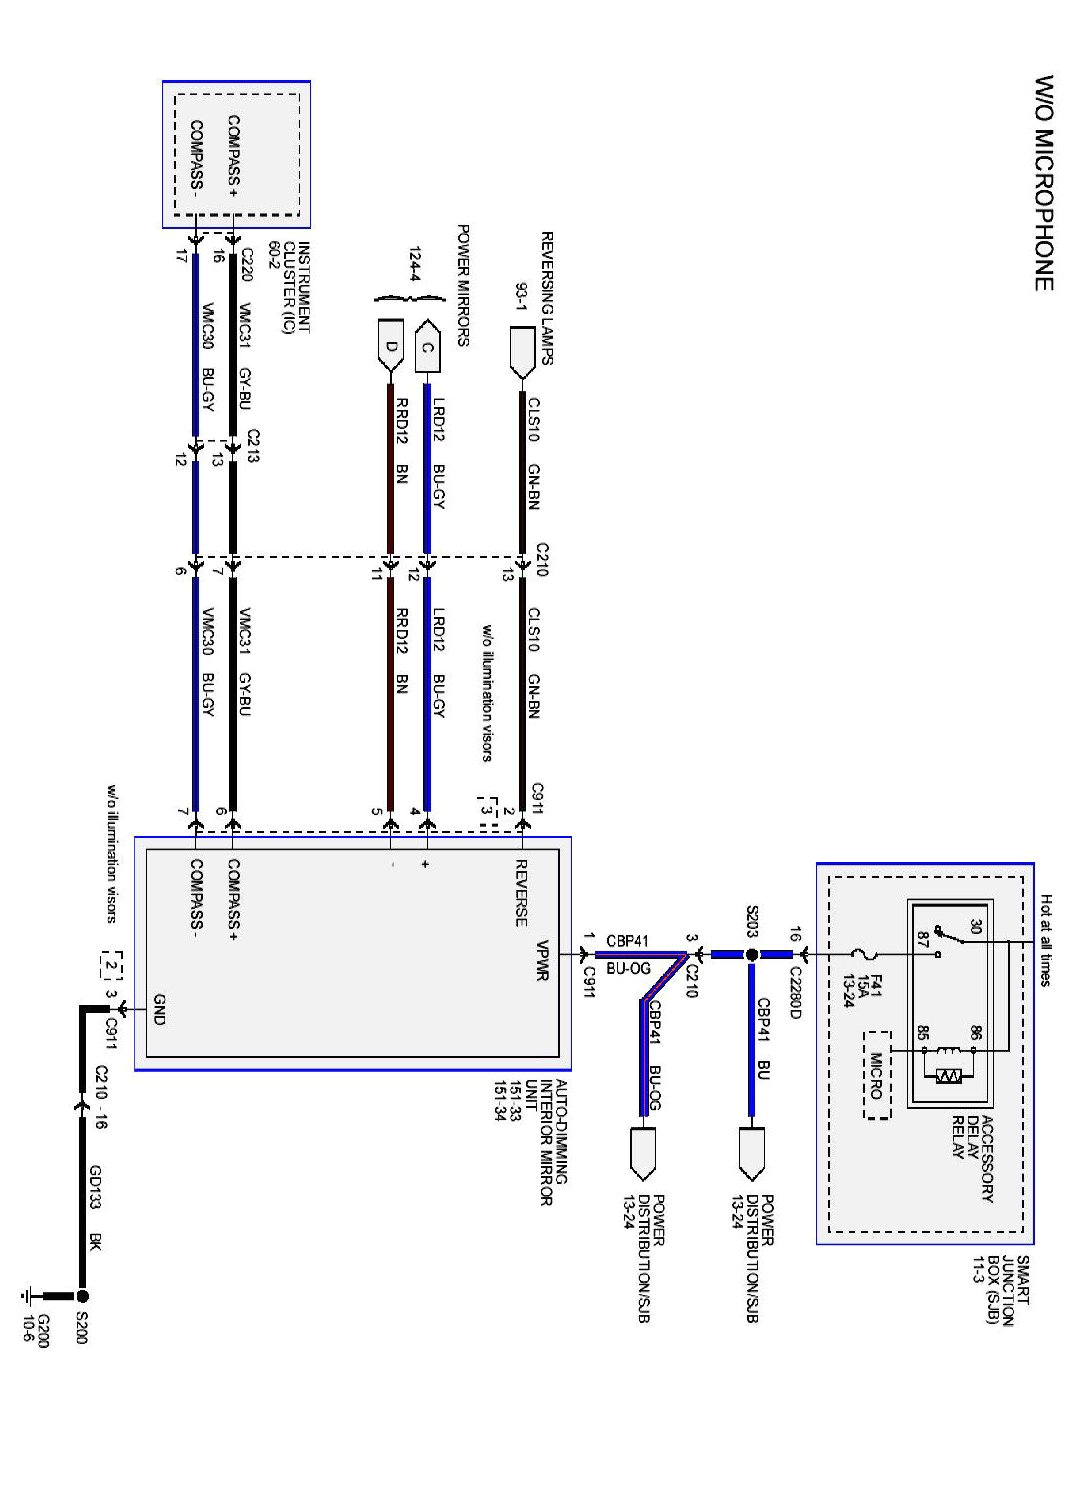 wiring diagram for 2007 ford edge wiring diagram name2007 ford edge wire diagram use wiring diagram